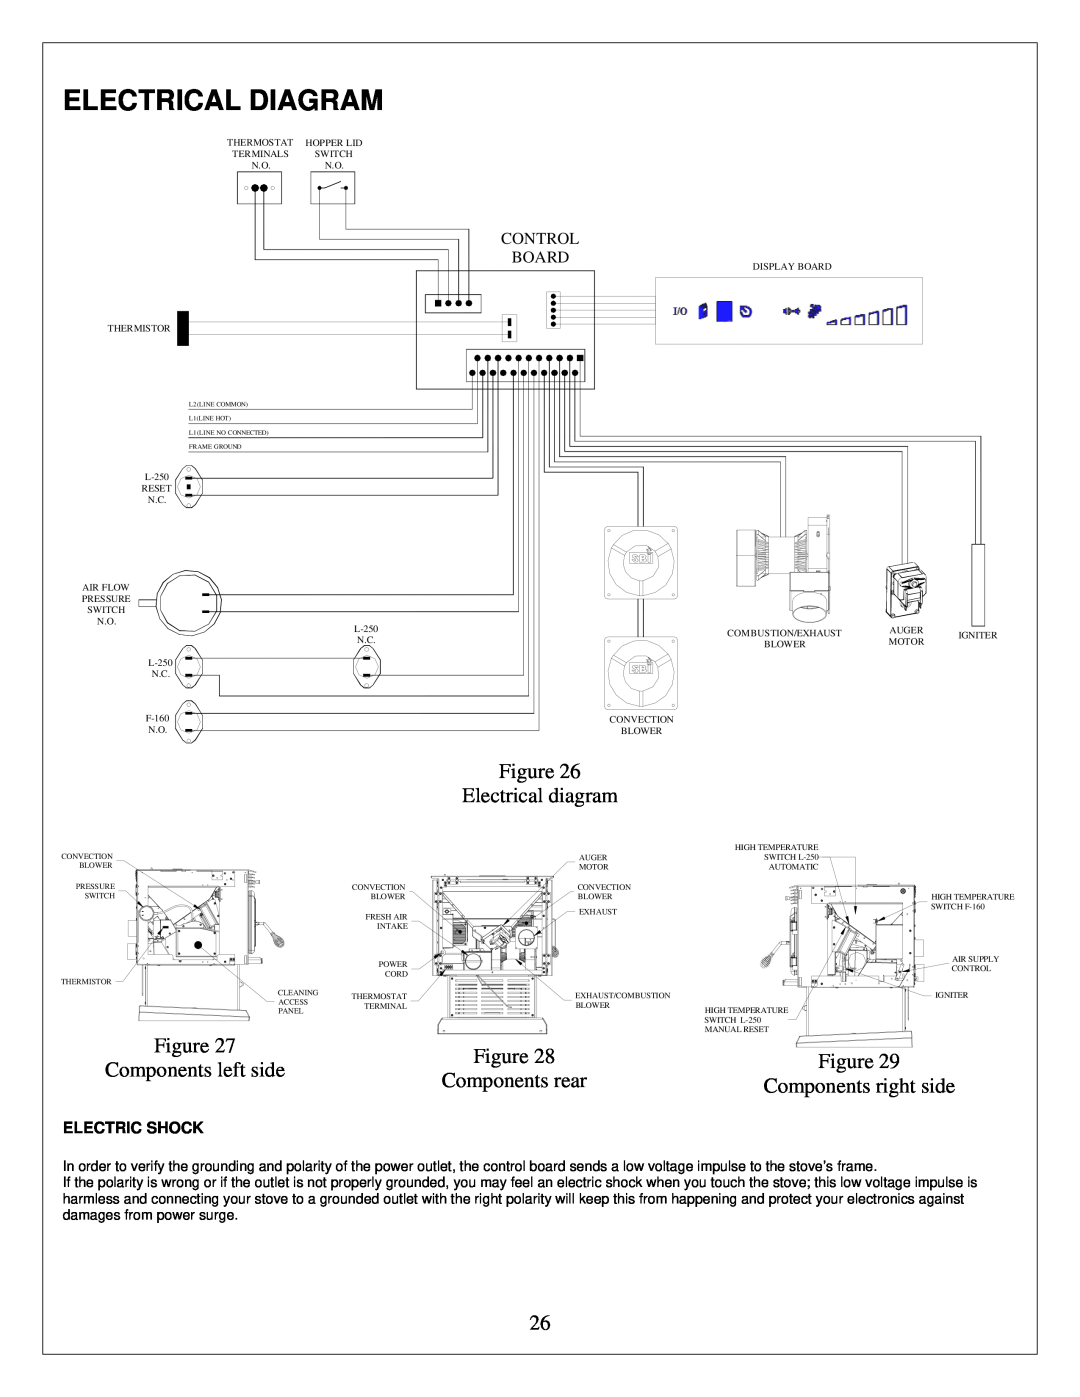 Drolet ECO-35 Electrical Diagram, Electrical diagram, Components left side, Components rear, Components right side 